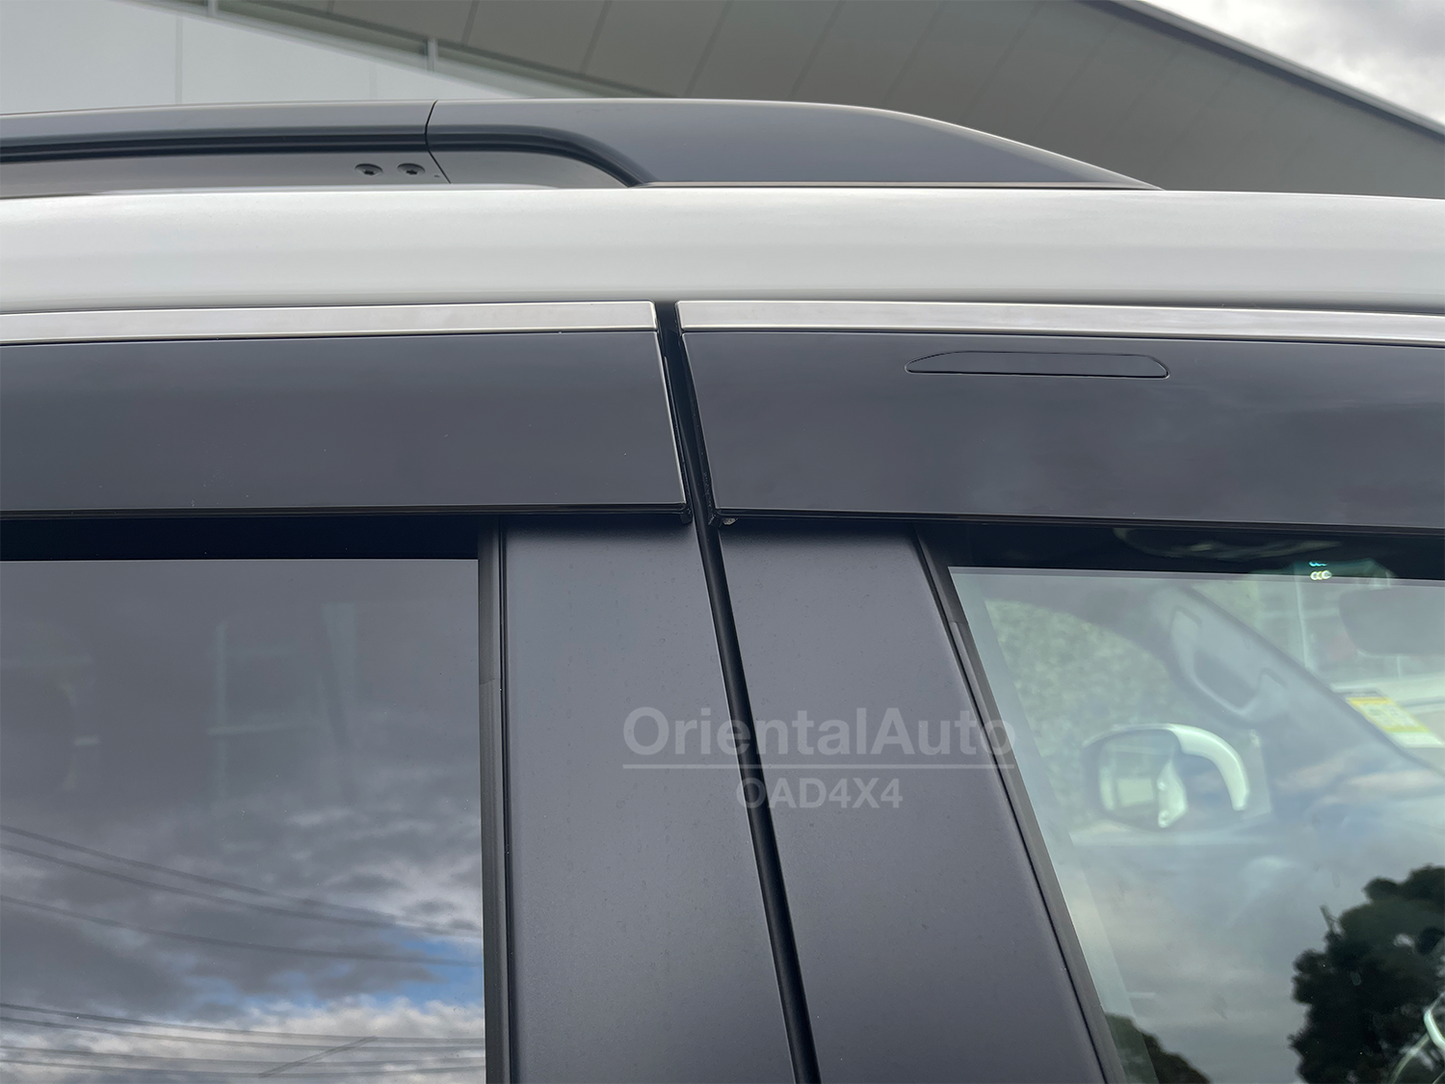 OAD Injection Stainless Weathershields For Toyota LandCruiser 300 Land Cruiser 300 LC300 2021+ Weather Shields Window Visor